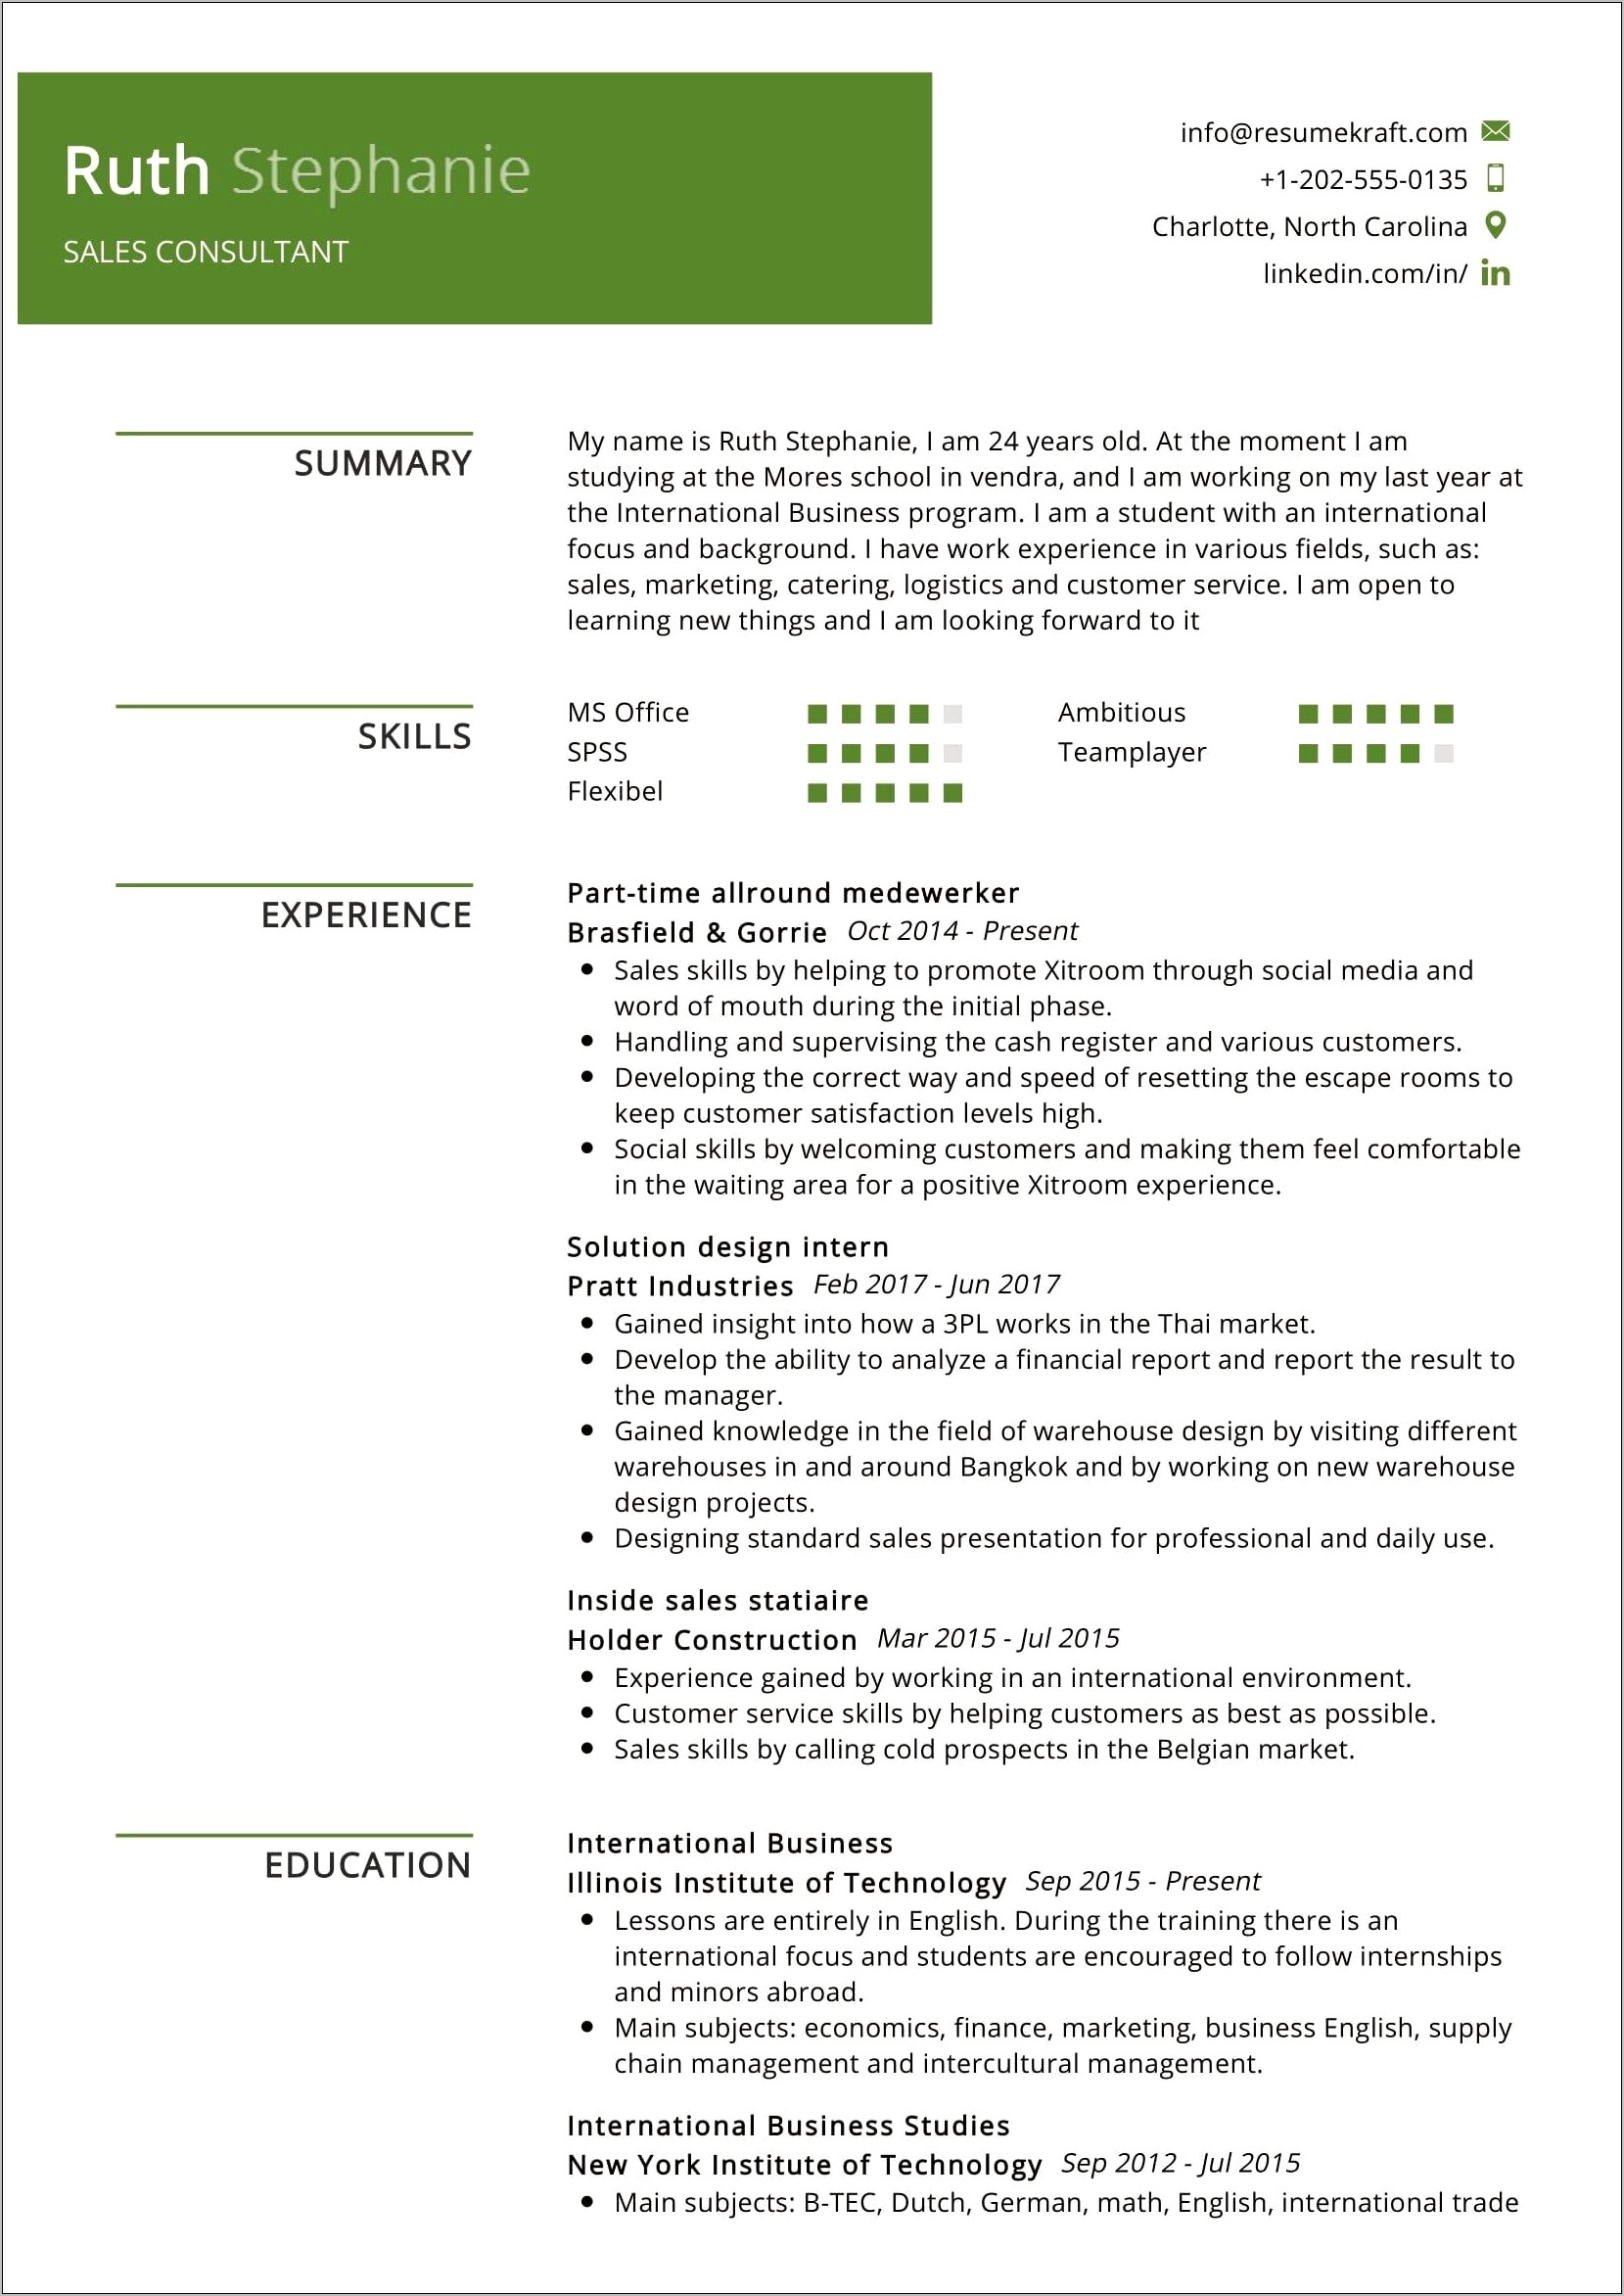 Good Short Paragraph For Catering Job Resume